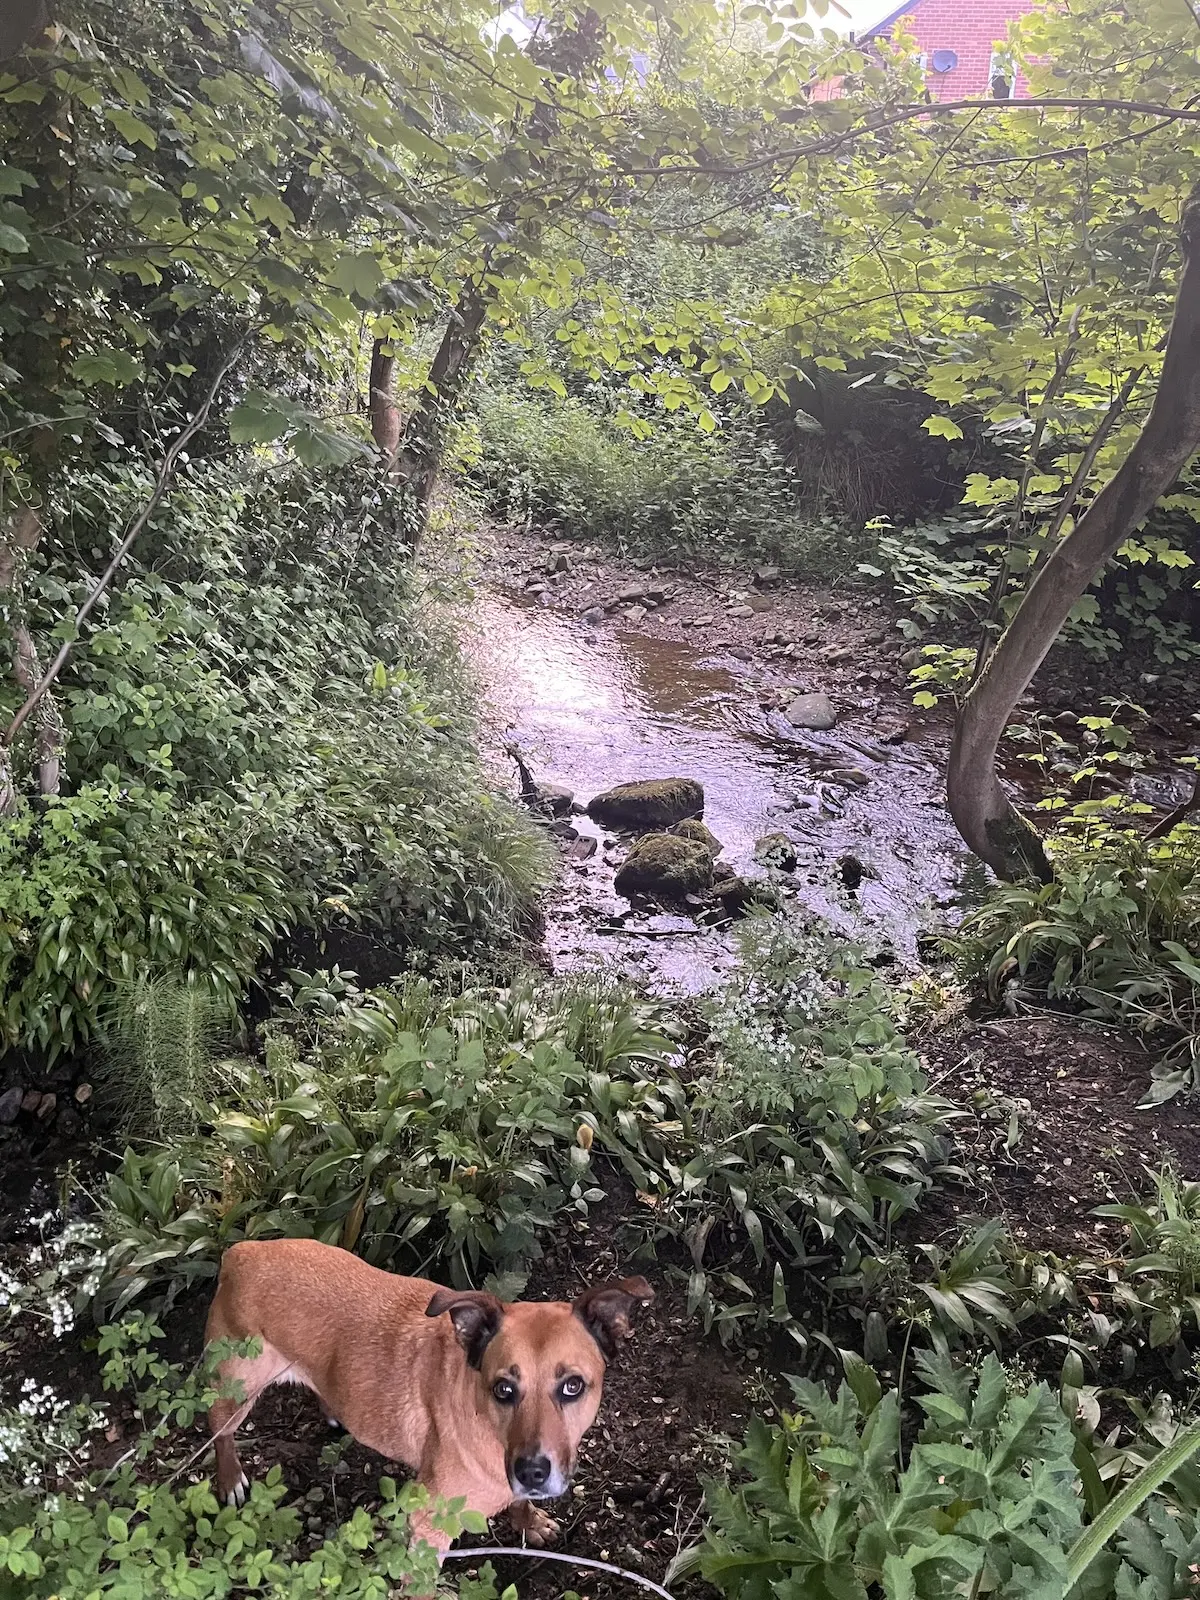 One of my dogs by our stream